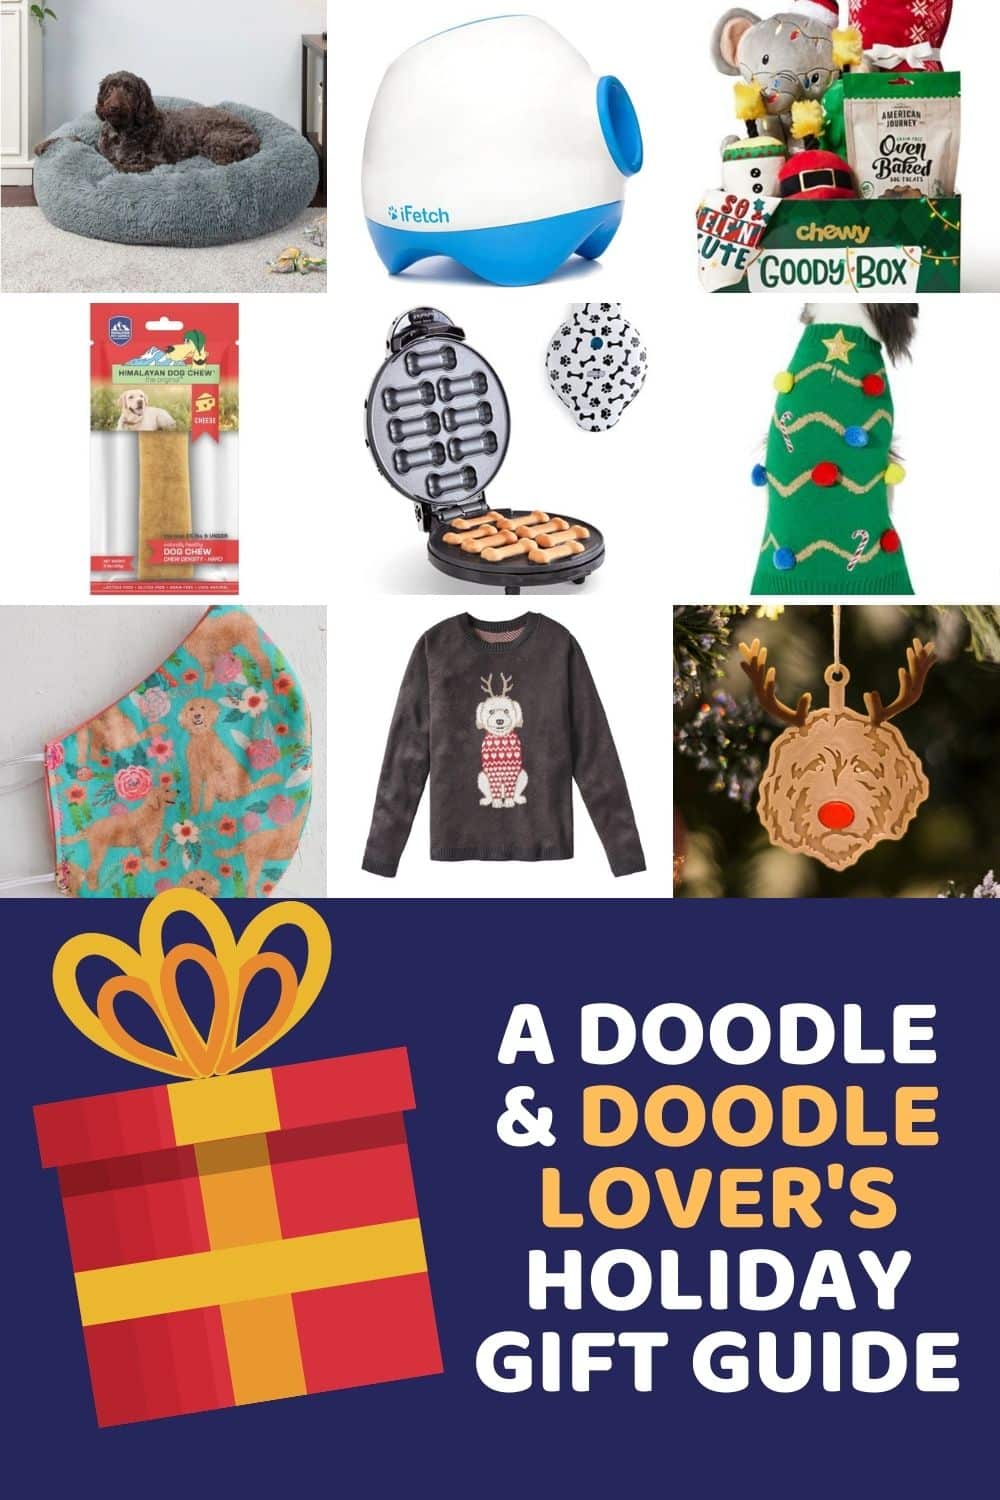 Best Goldendoodle gifts - The Ultimate Guide For Your Holiday Season!